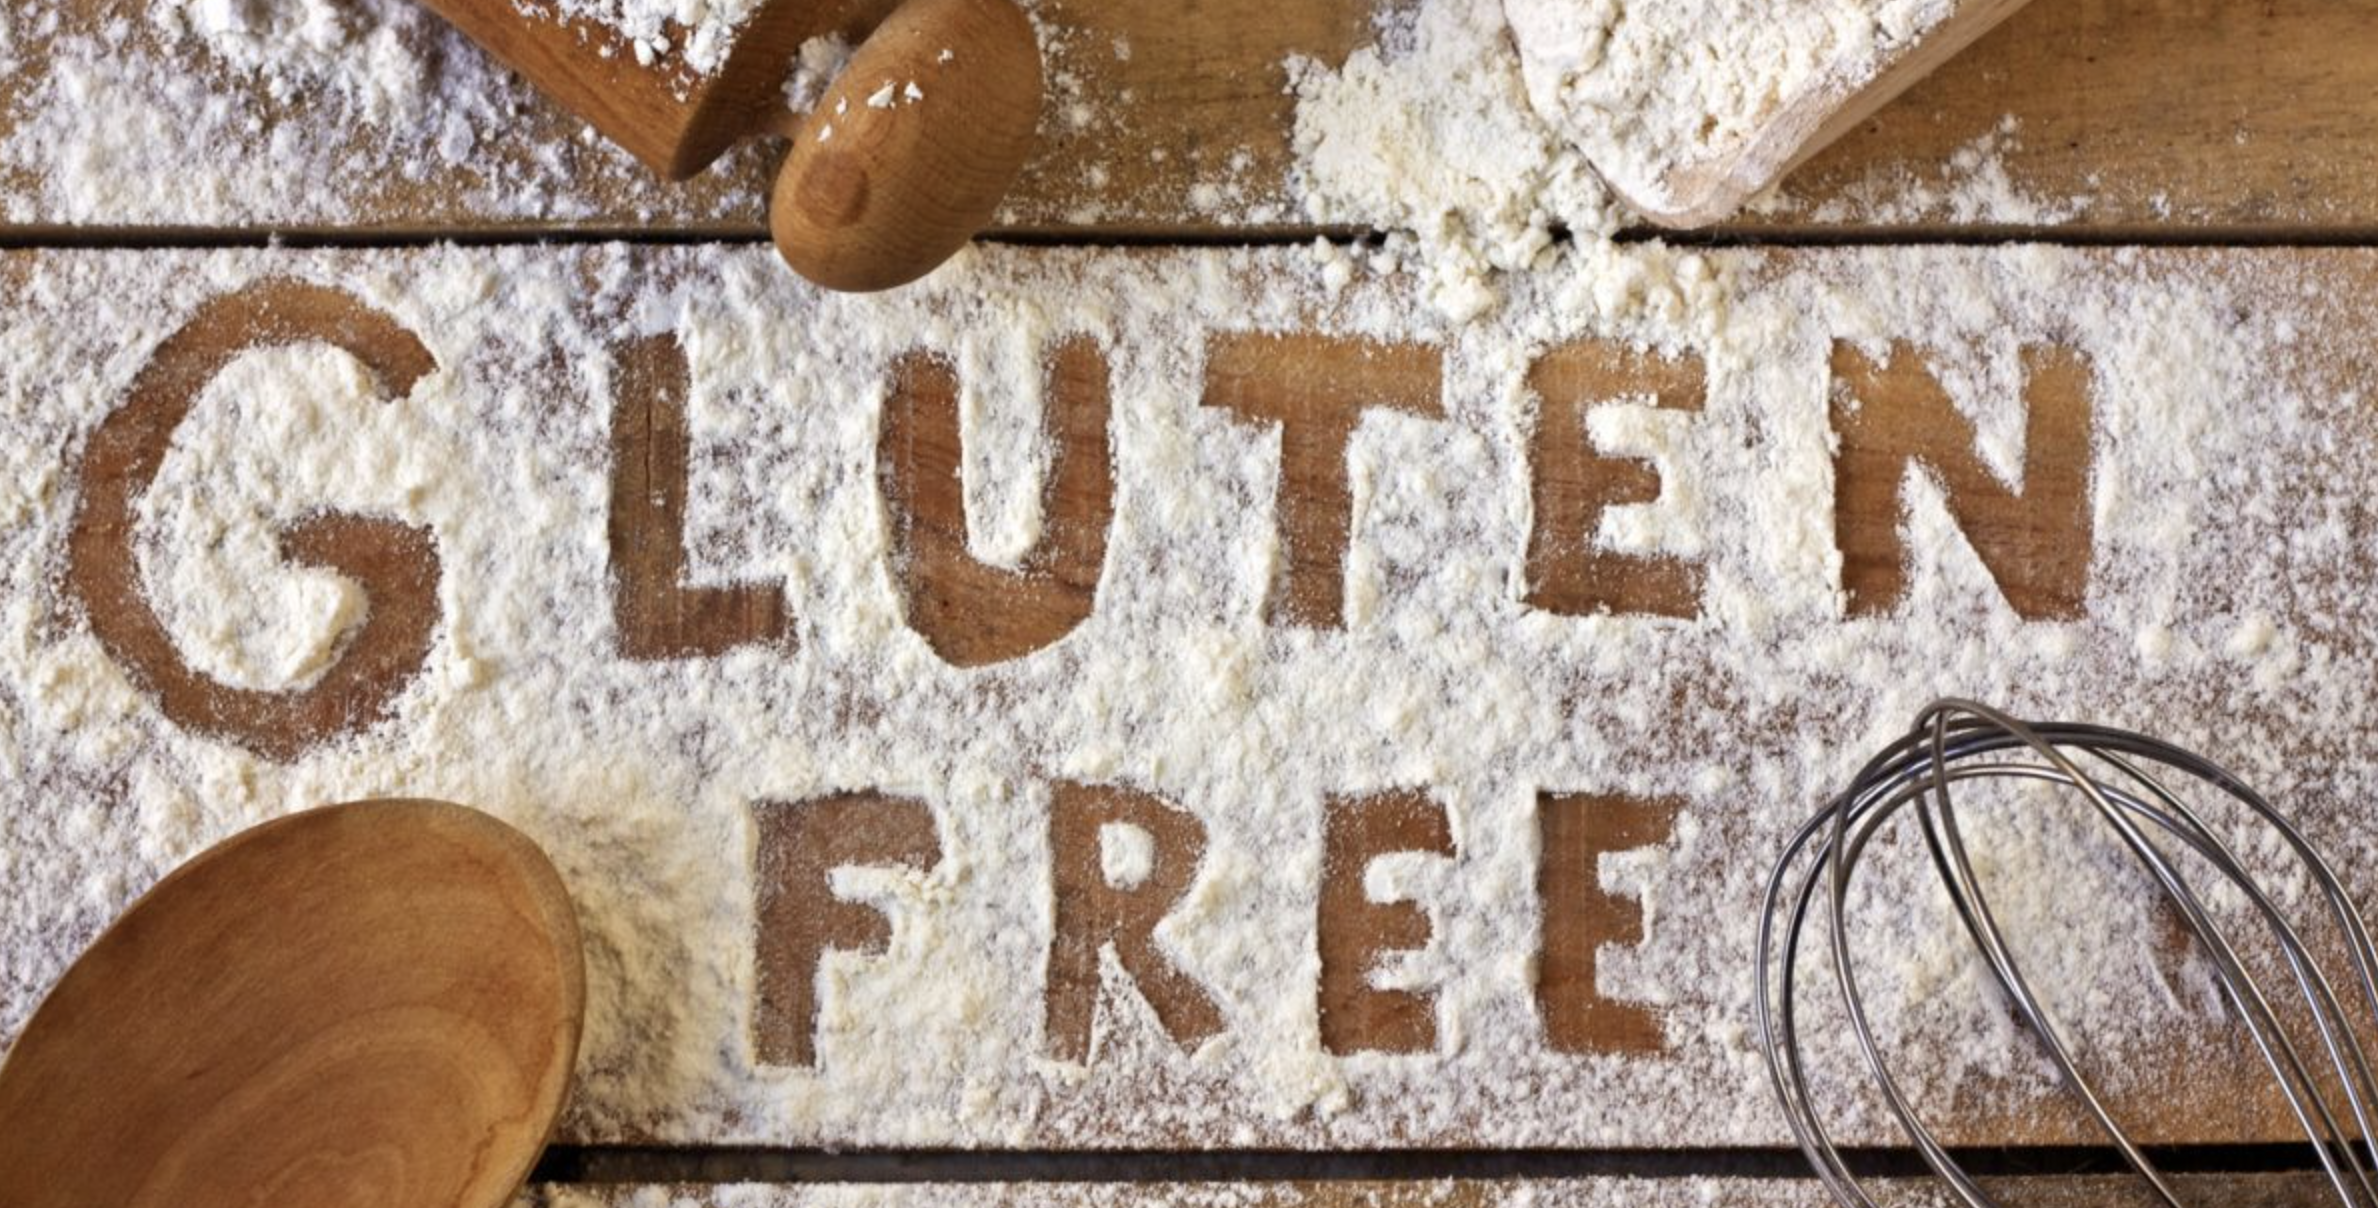 This week from Olympus: What’s the big deal with going “Gluten Free?”